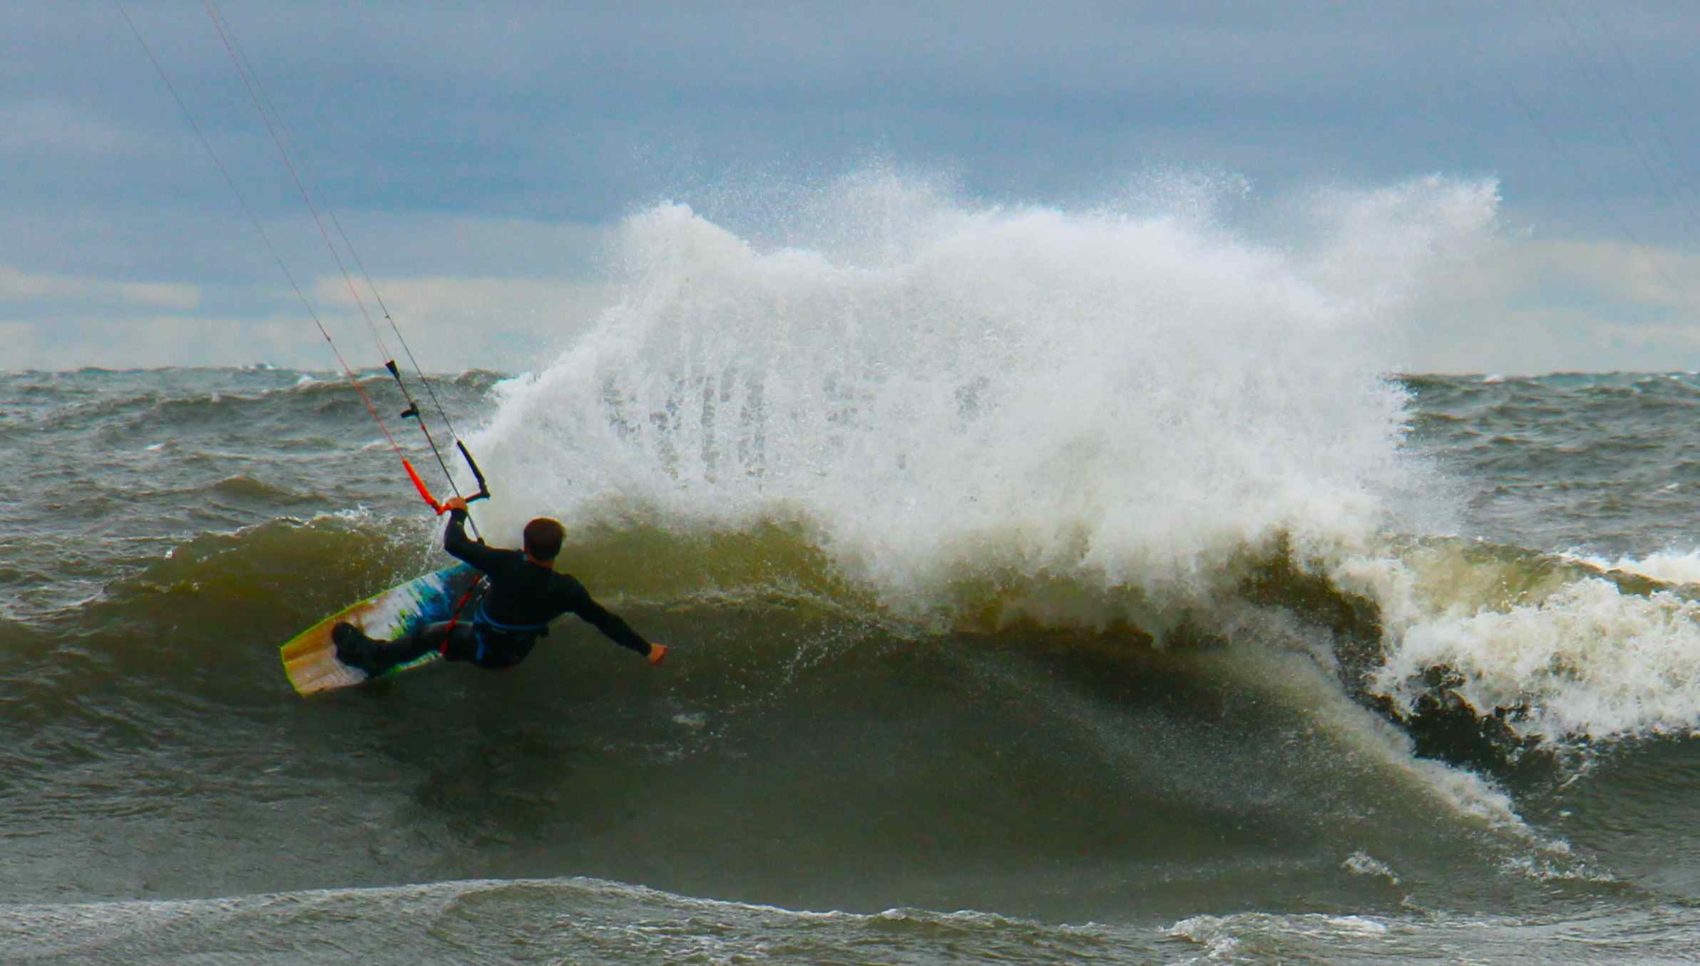 Wind and waves were pumping during last weekend’s King Of The Great Lakes Kiteboarding Festival